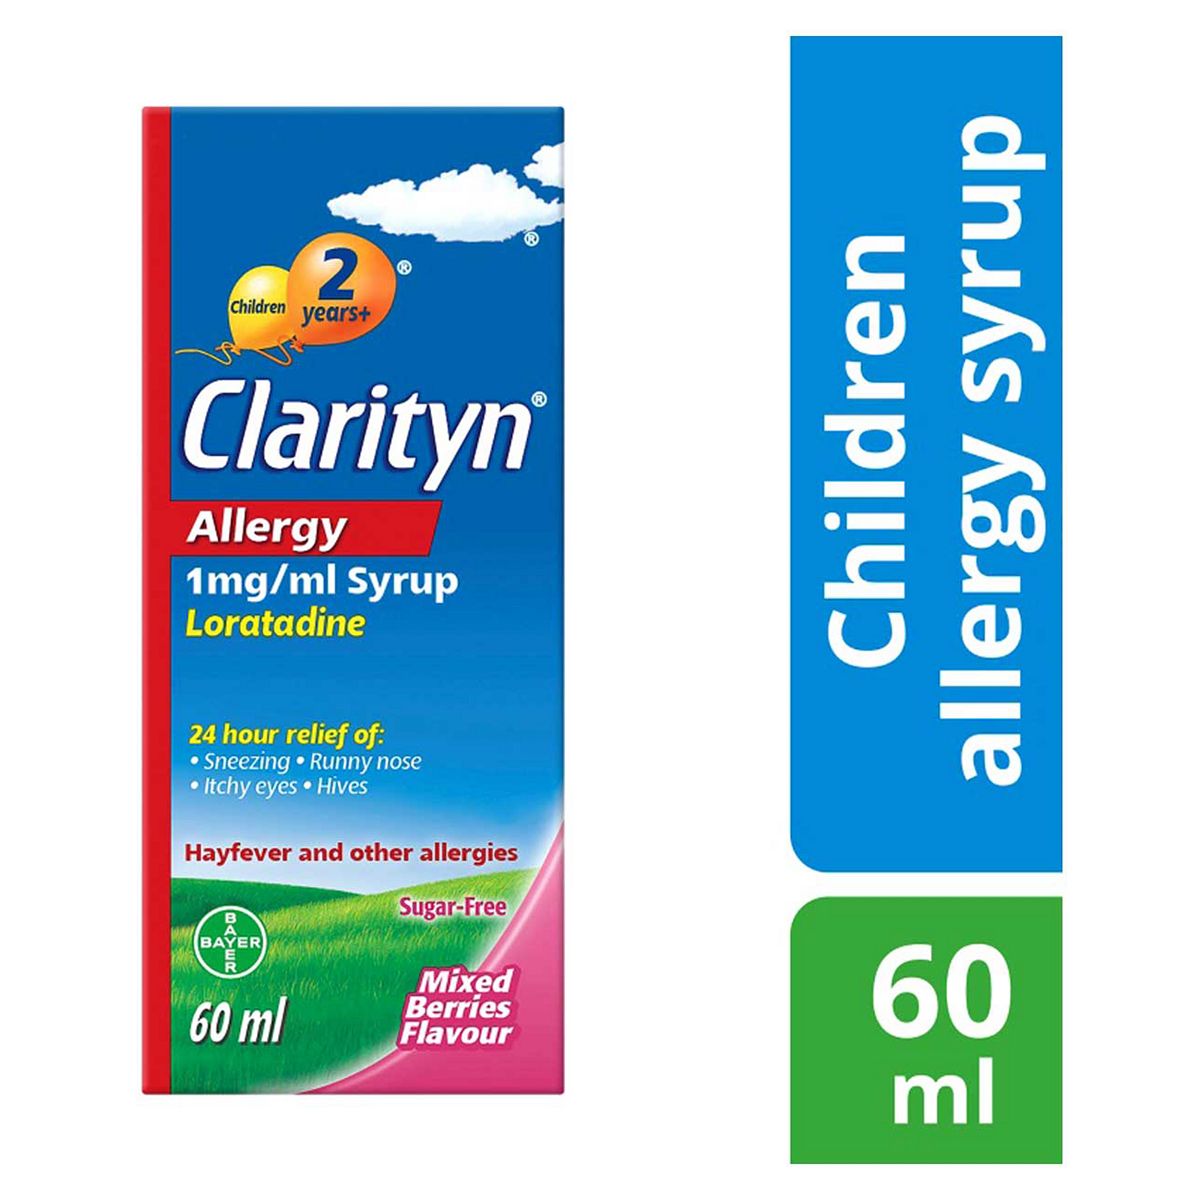 Clarityn Allergy 1mg/ml Syrup Sugar Free Mixed Berries Flavour 60ml Baby Healthcare Boots   